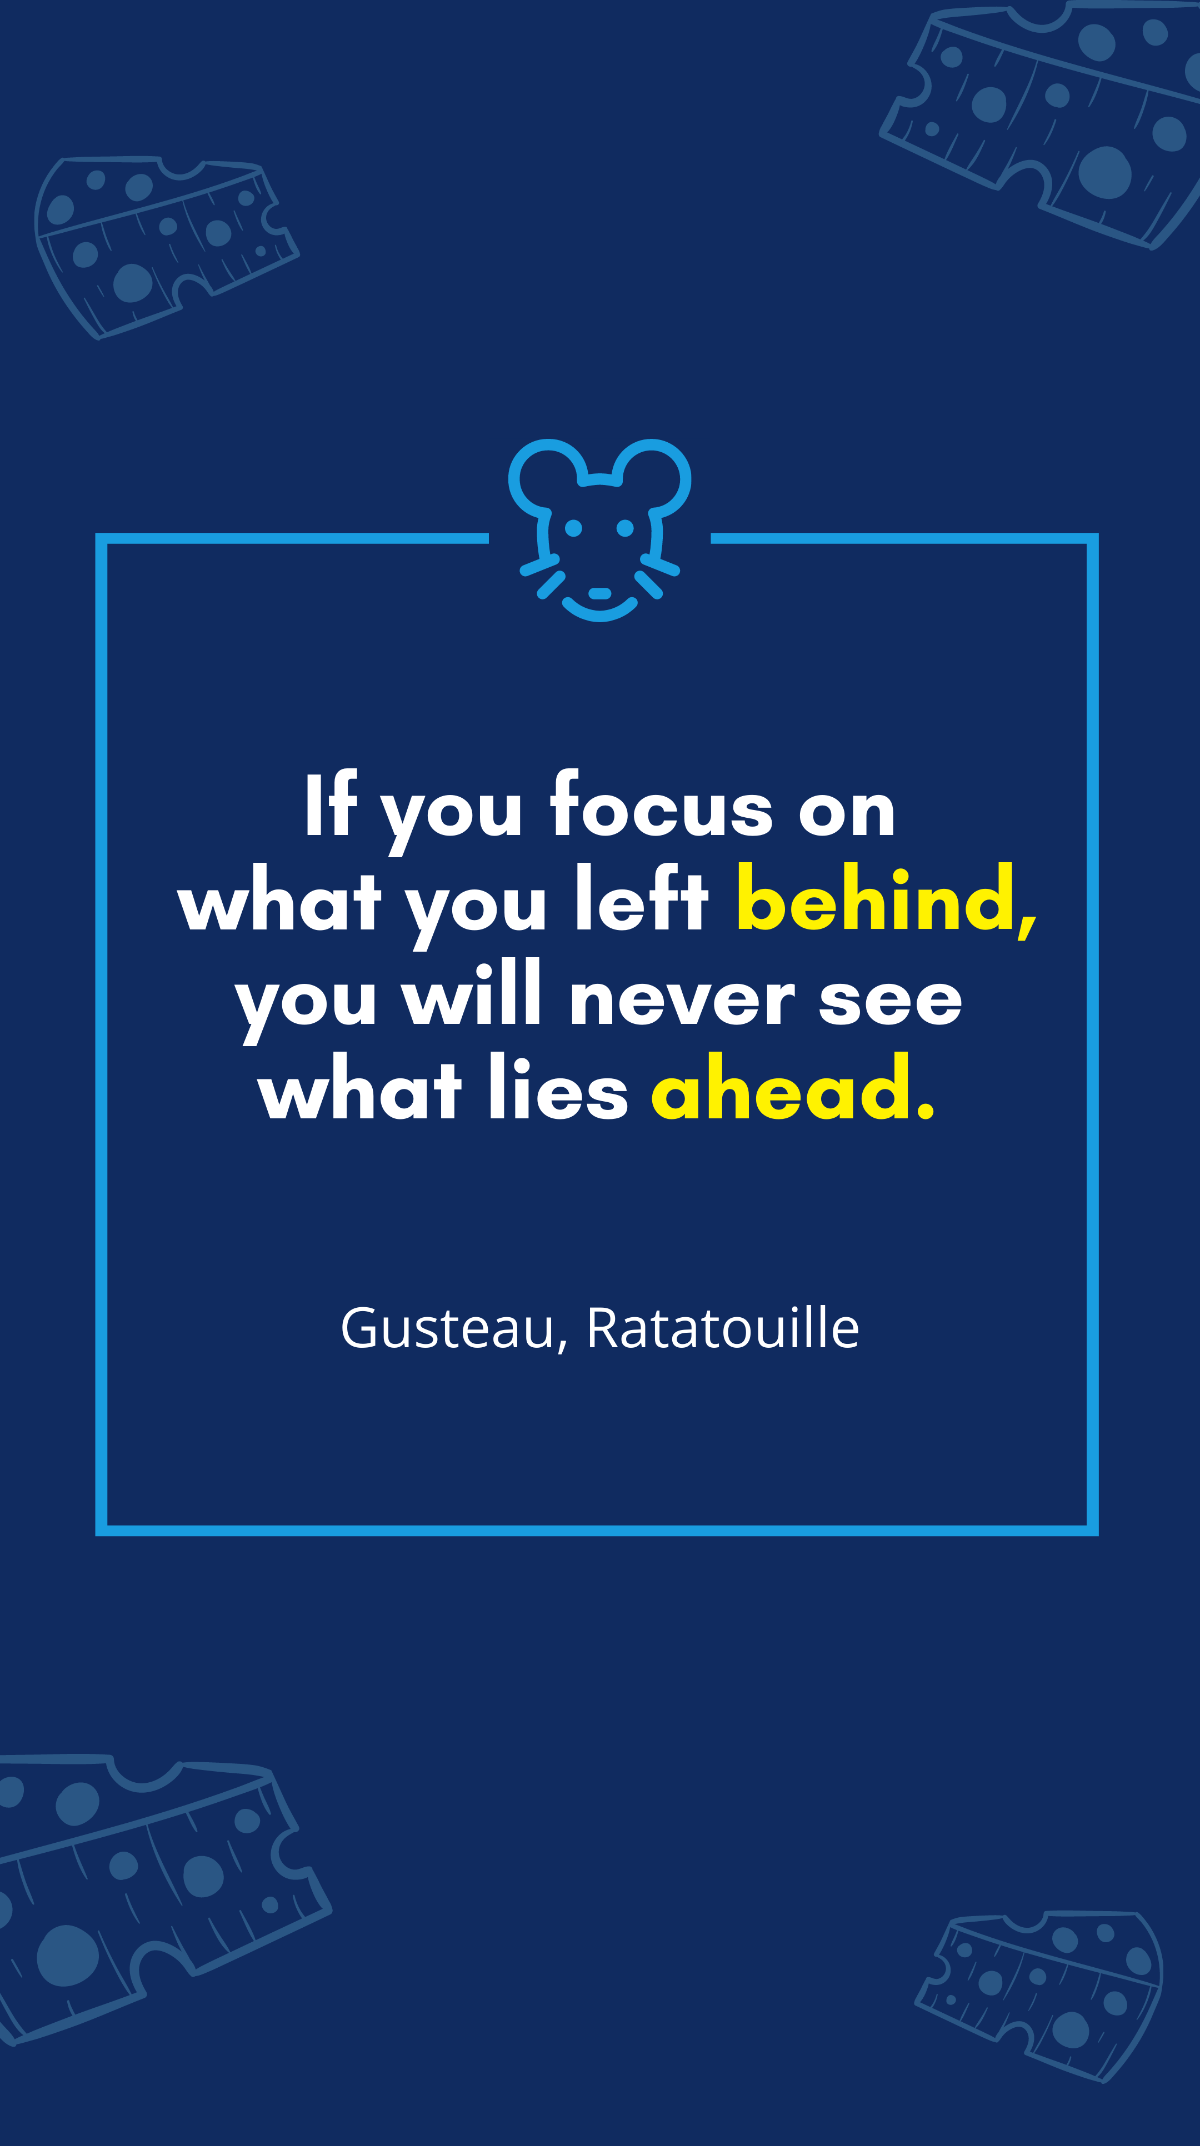 Gusteau, Ratatouille - If you focus on what you left behind, you will never see what lies ahead Template